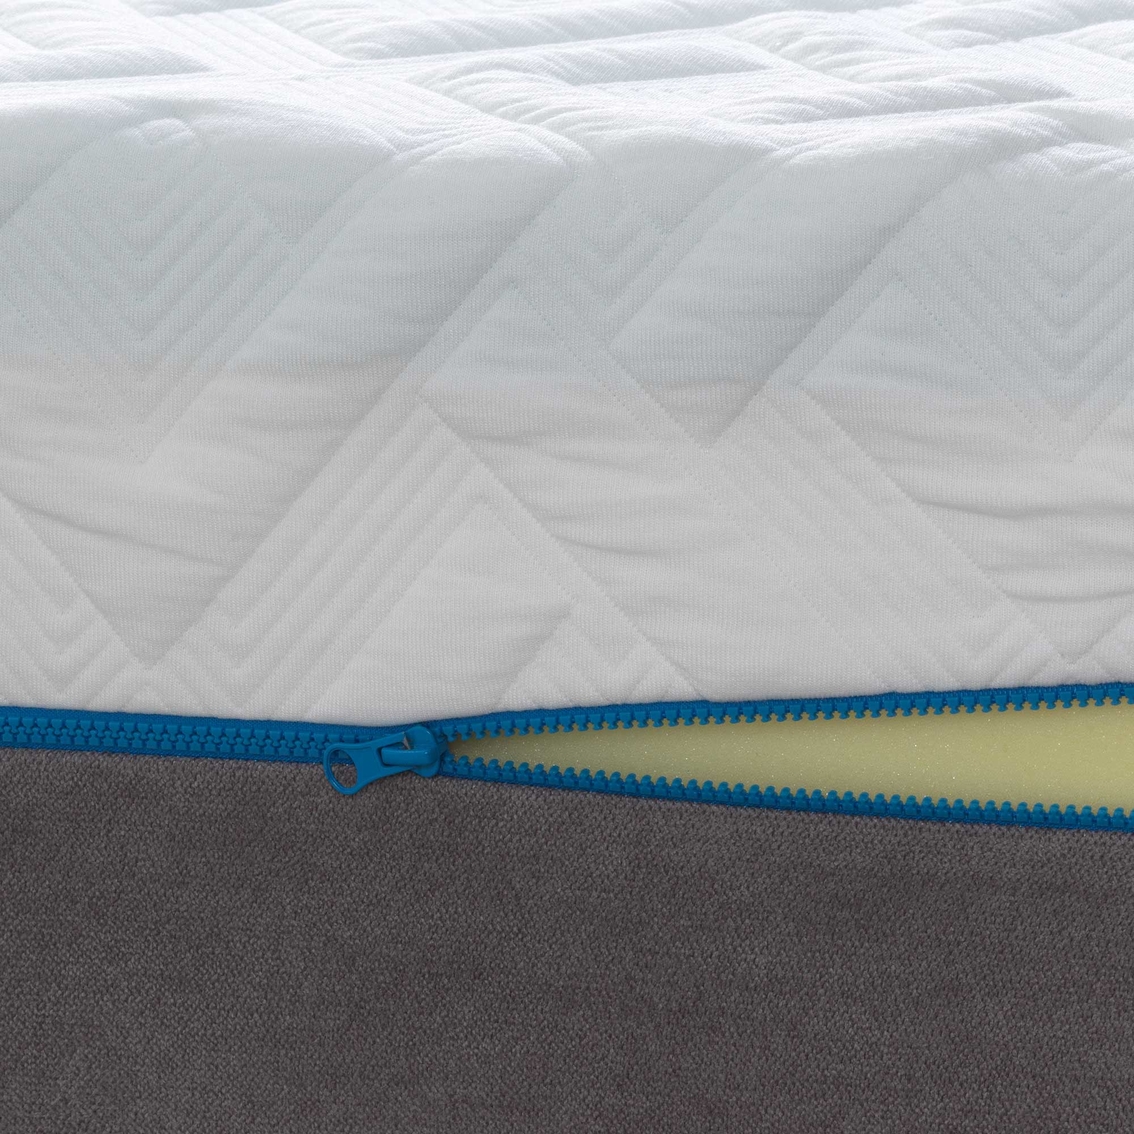 Motion Trend 12 in. Plush Gel Infused Memory Foam Mattress with Adjustable Base - Image 4 of 4